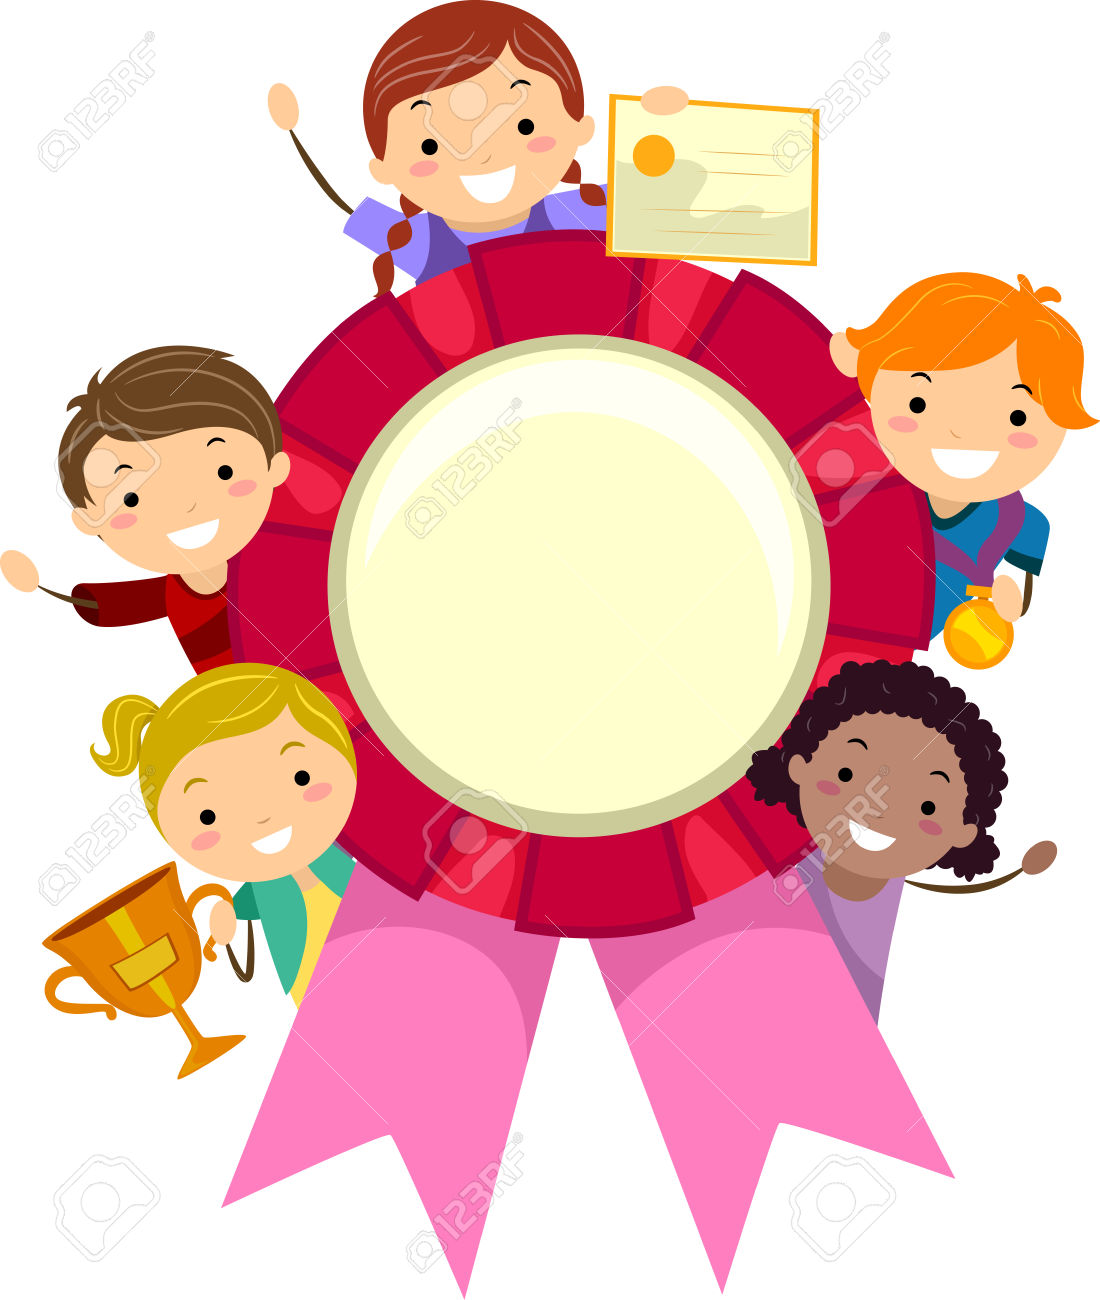 Recognition clipart free.